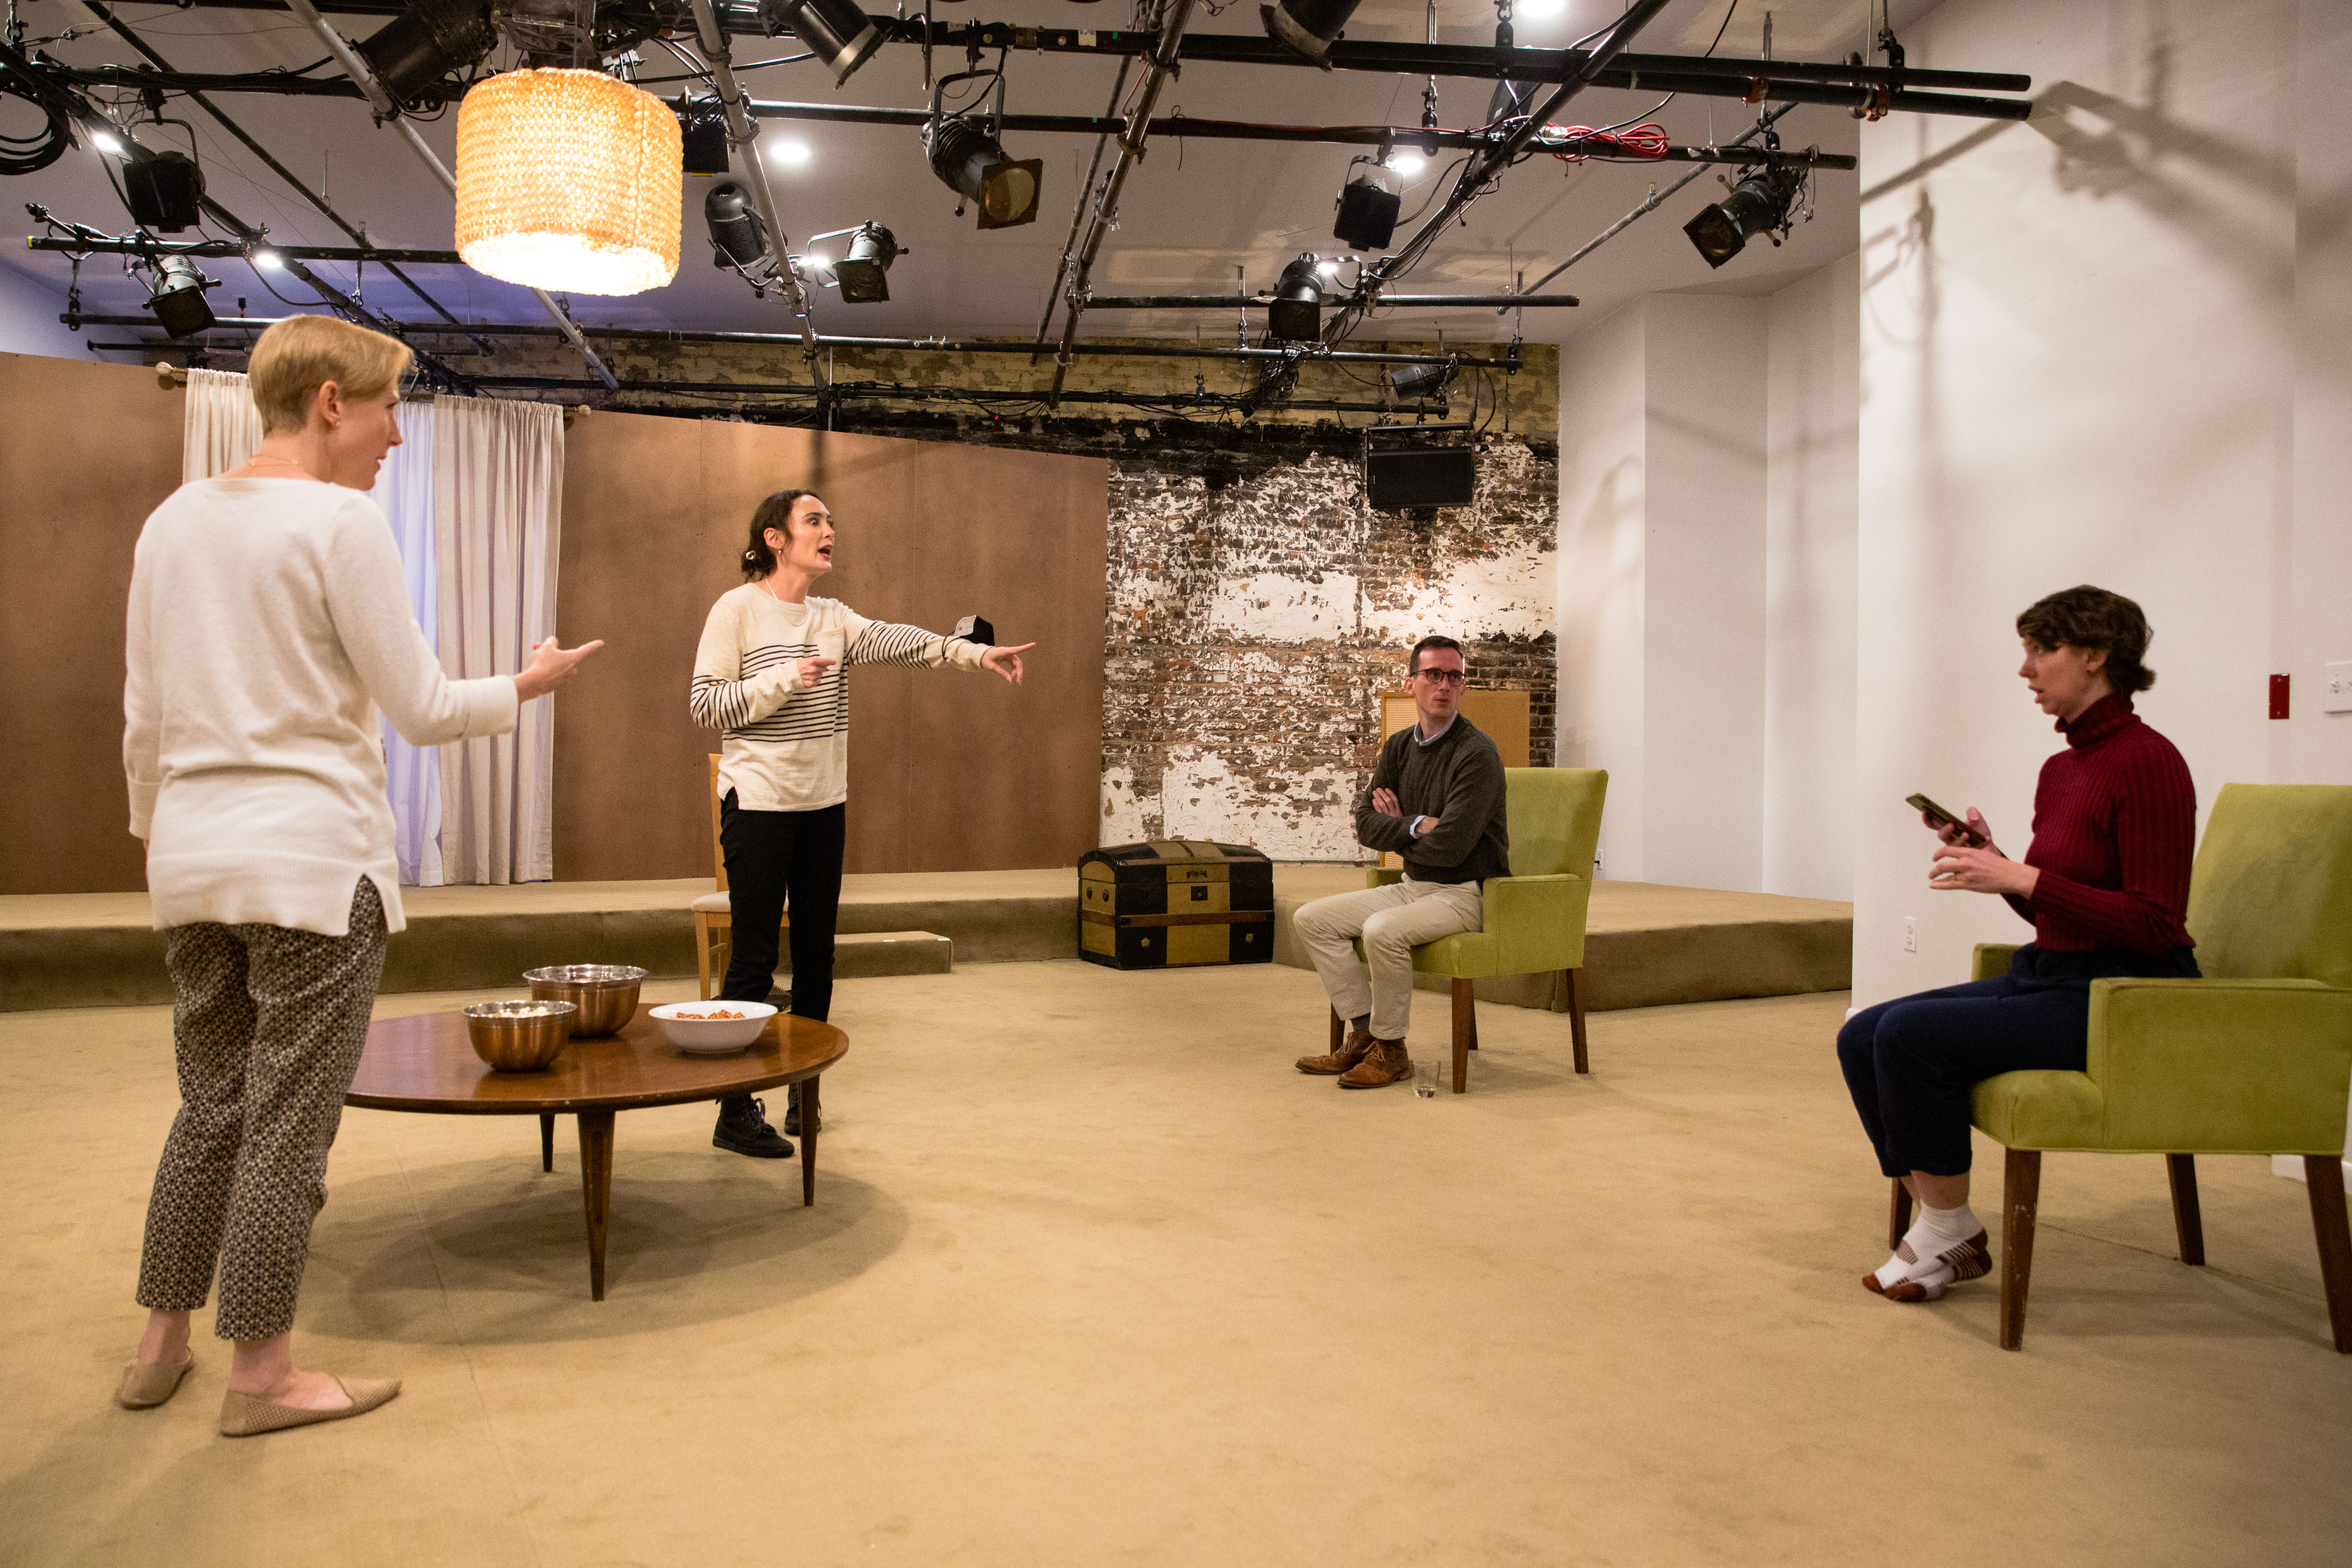 Hoi Polloi presents WHITE ON WHITE, written by Robert Quillen Camp, co-directed by Alec Duffy & Lori Elizabeth Parquet, at JACK Brooklyn, photo by David Gonsier